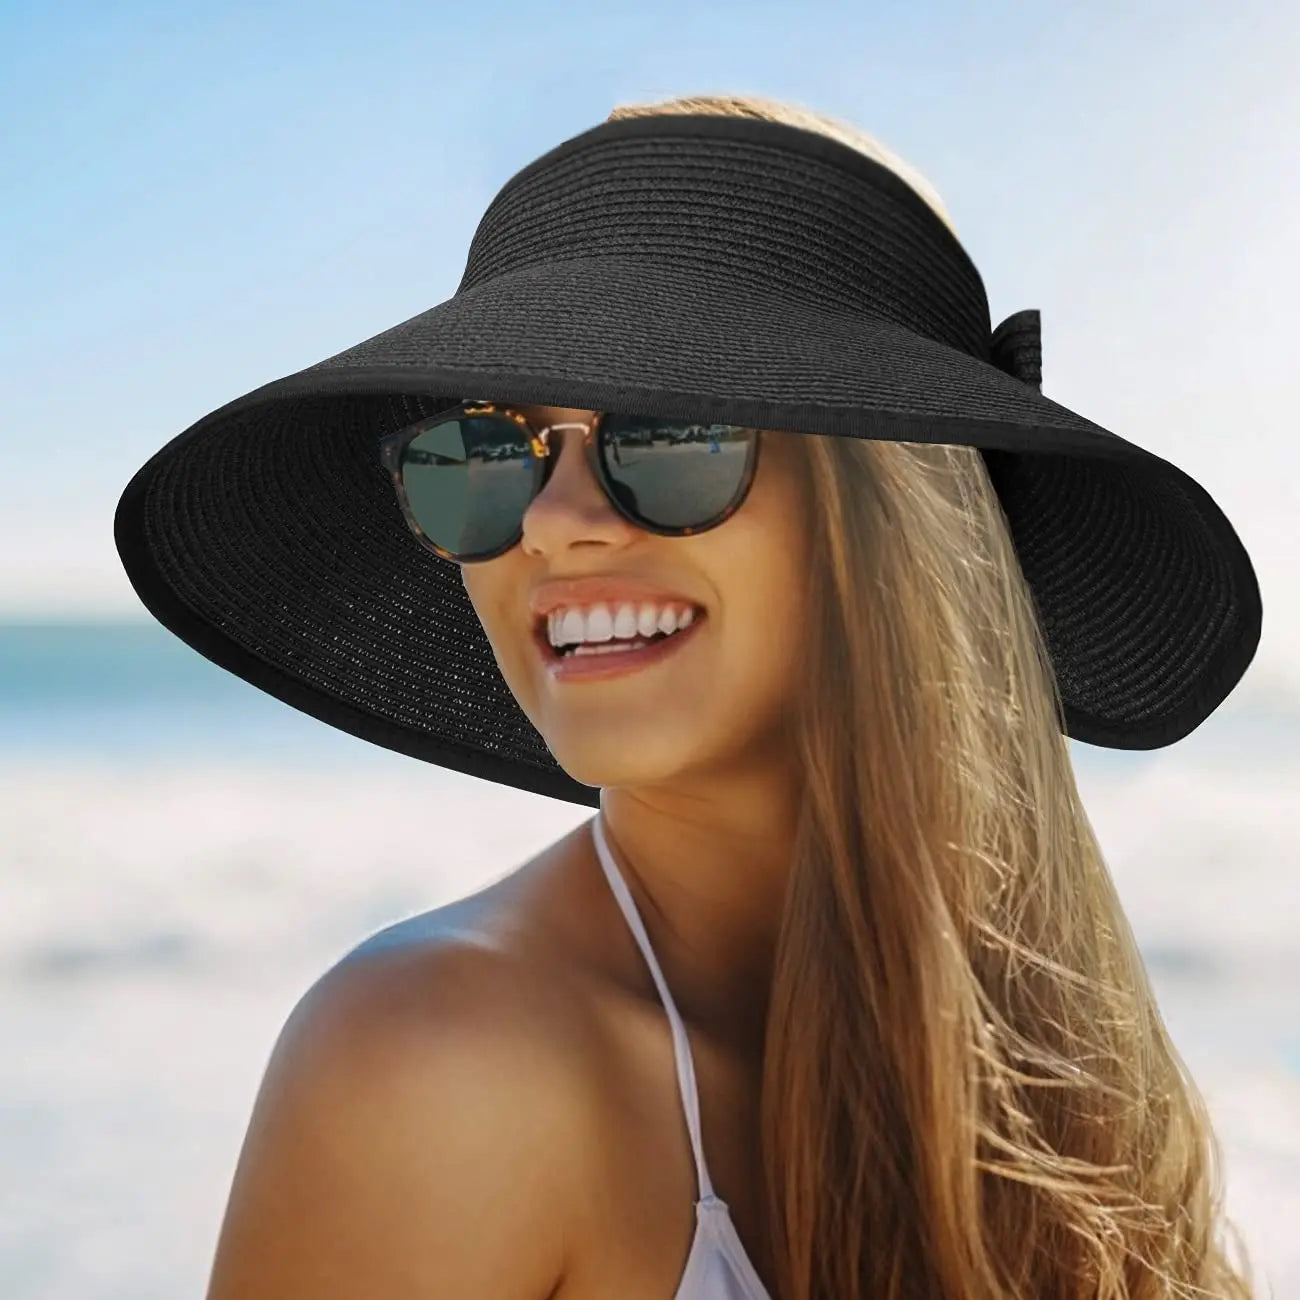 Women Summer Visors Hat Hat - Stylish and UV-Resistant for Outdoor HikingFoldable Sun Cap Wide Large Brim Beach Straw Hats Chape